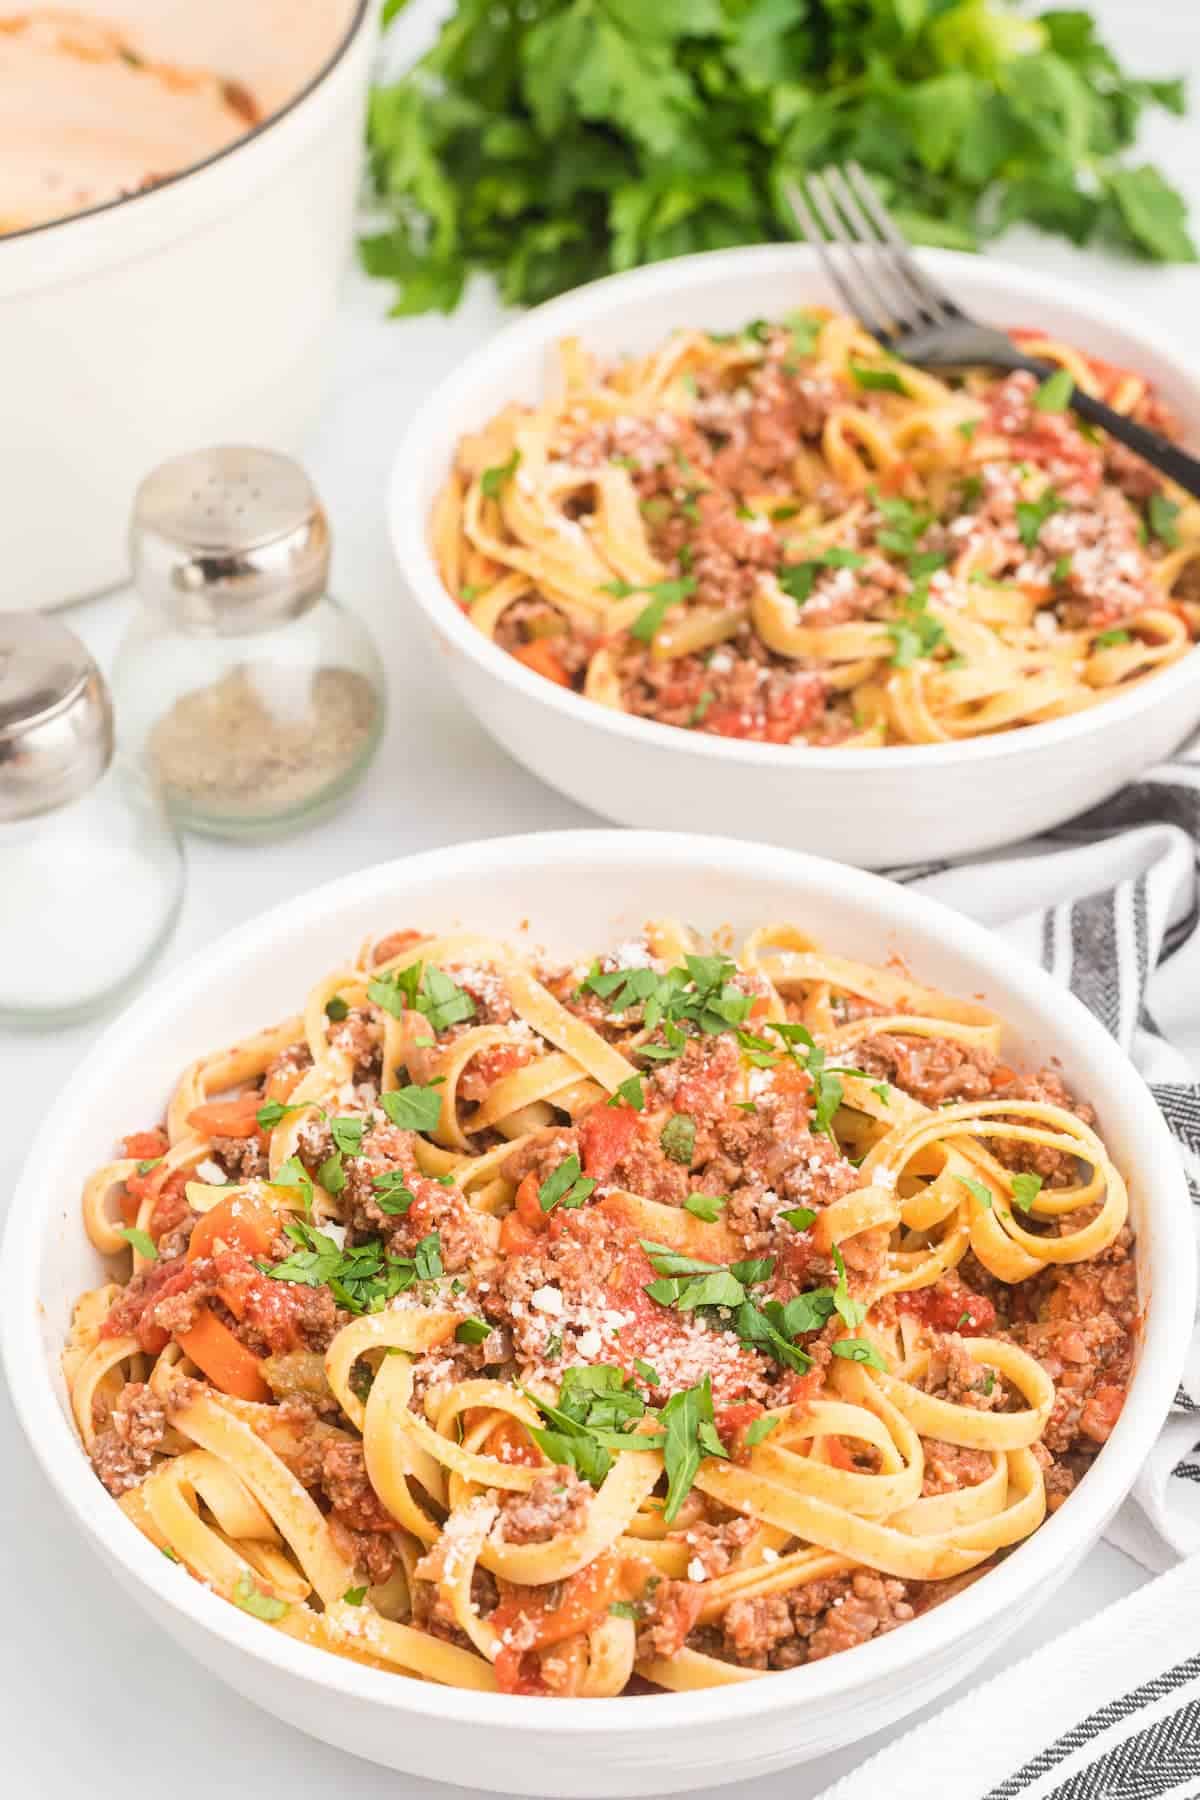 two white bowls filled with the authentic bolognese sauce over pasta noodles.